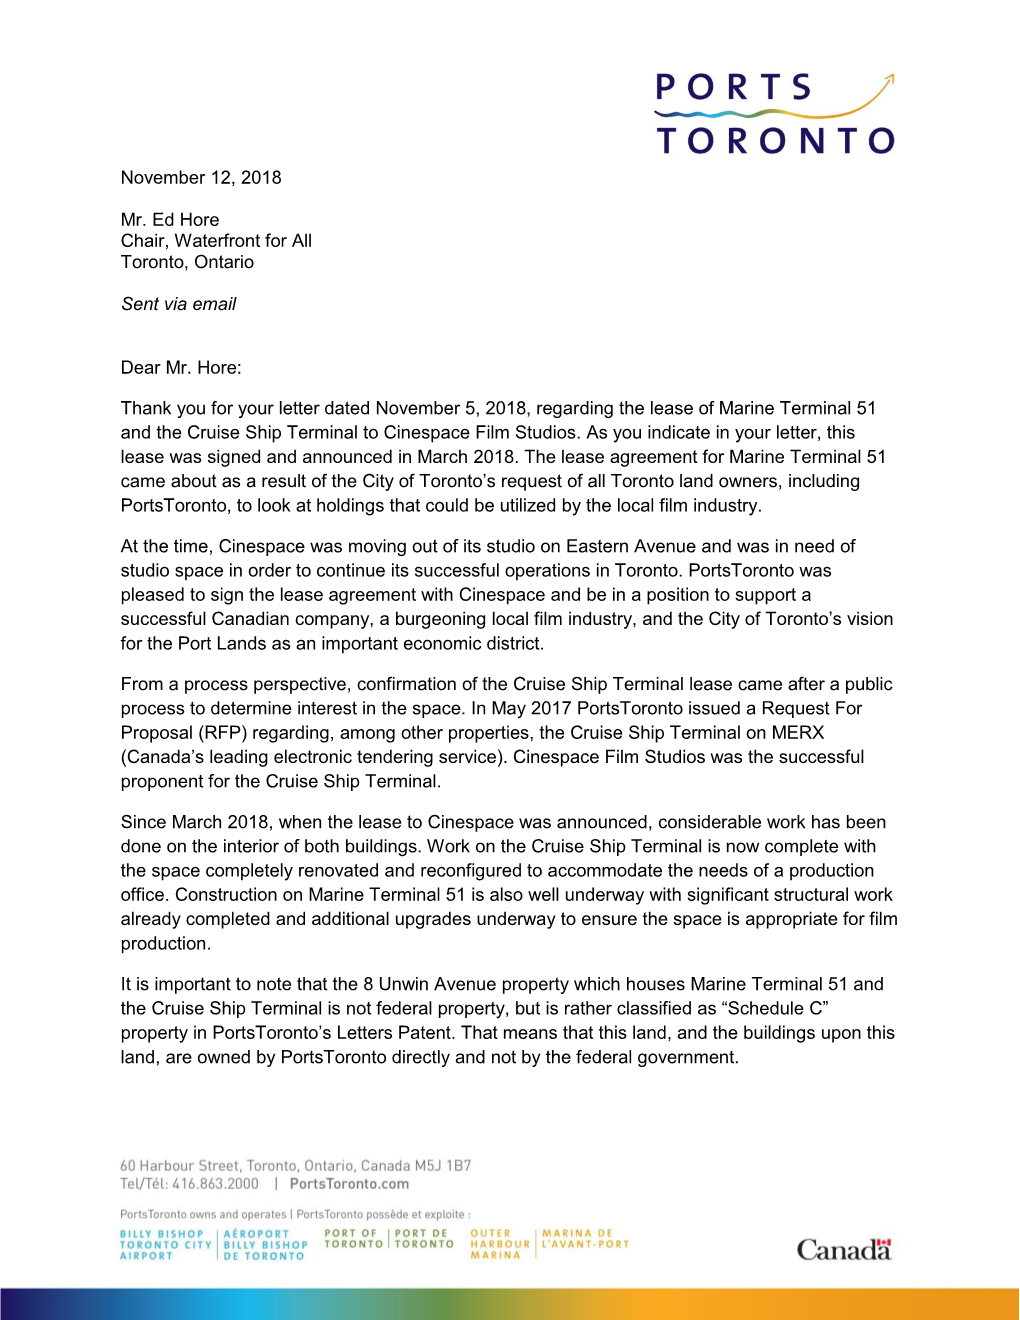 Letter from Portstoronto CEO Geoffrey Wilson to Ed Hore, Chair Of